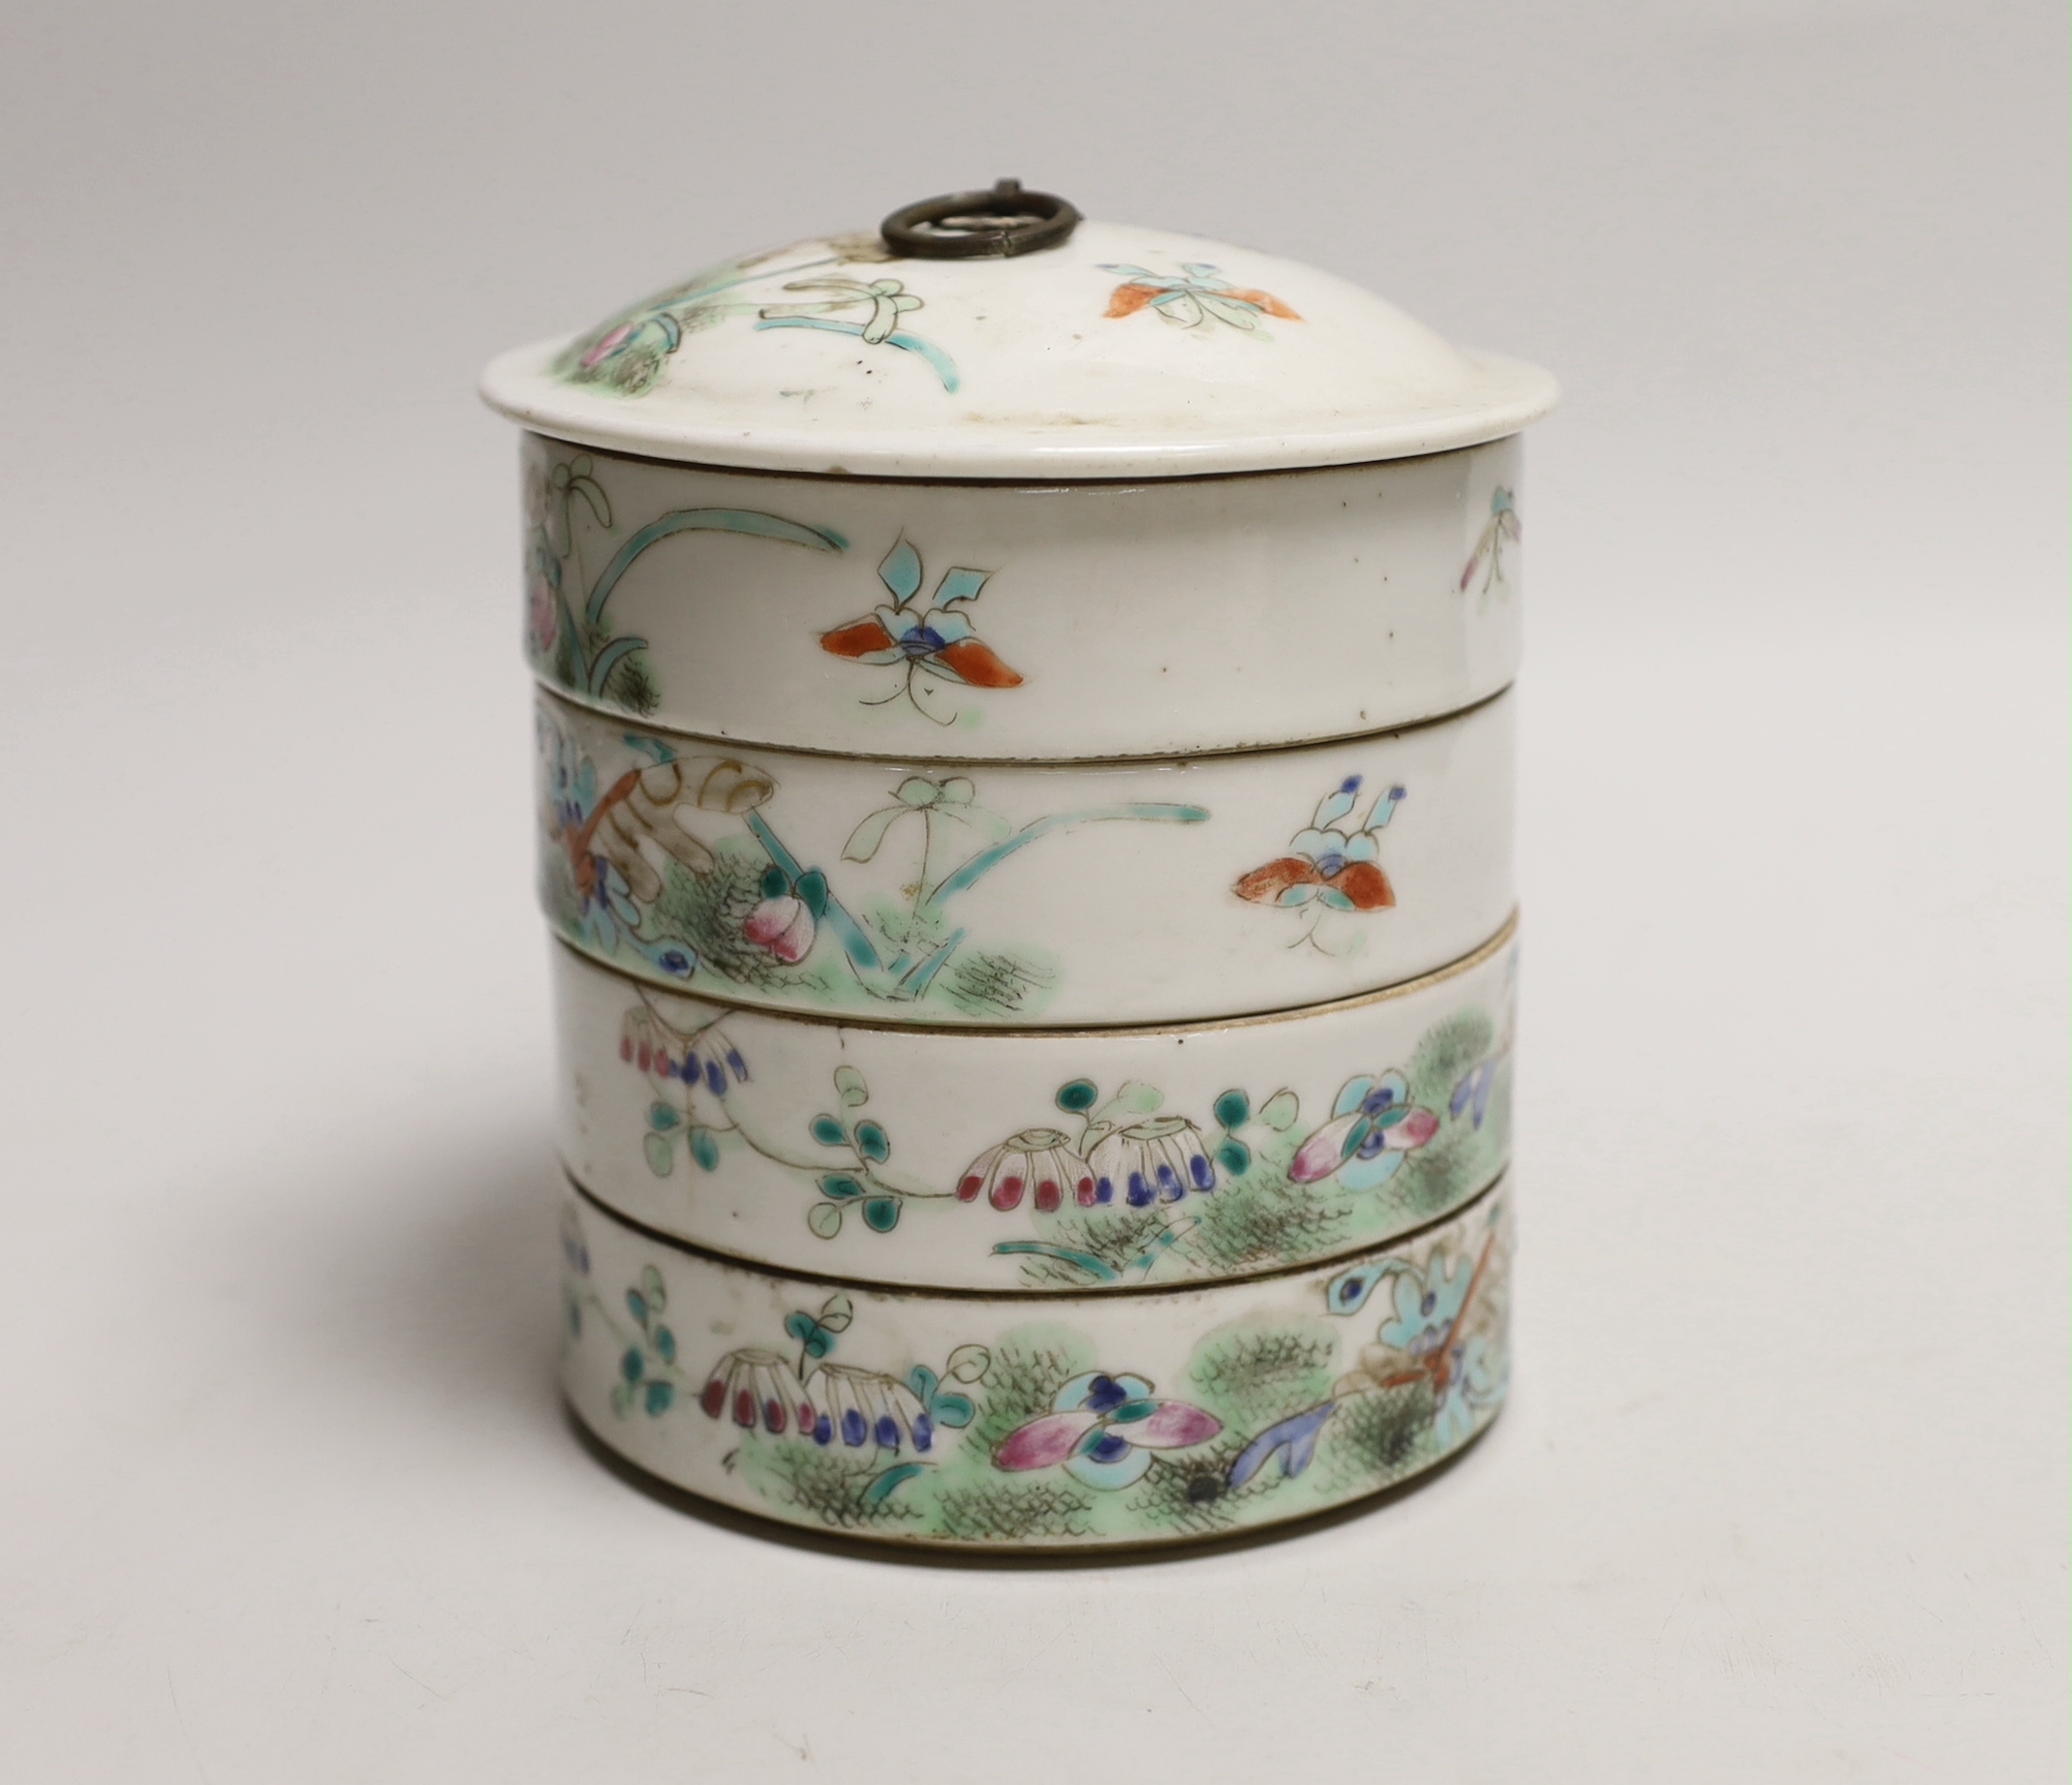 An early 20th century Chinese stacking food container, 13.5cm - Image 2 of 5